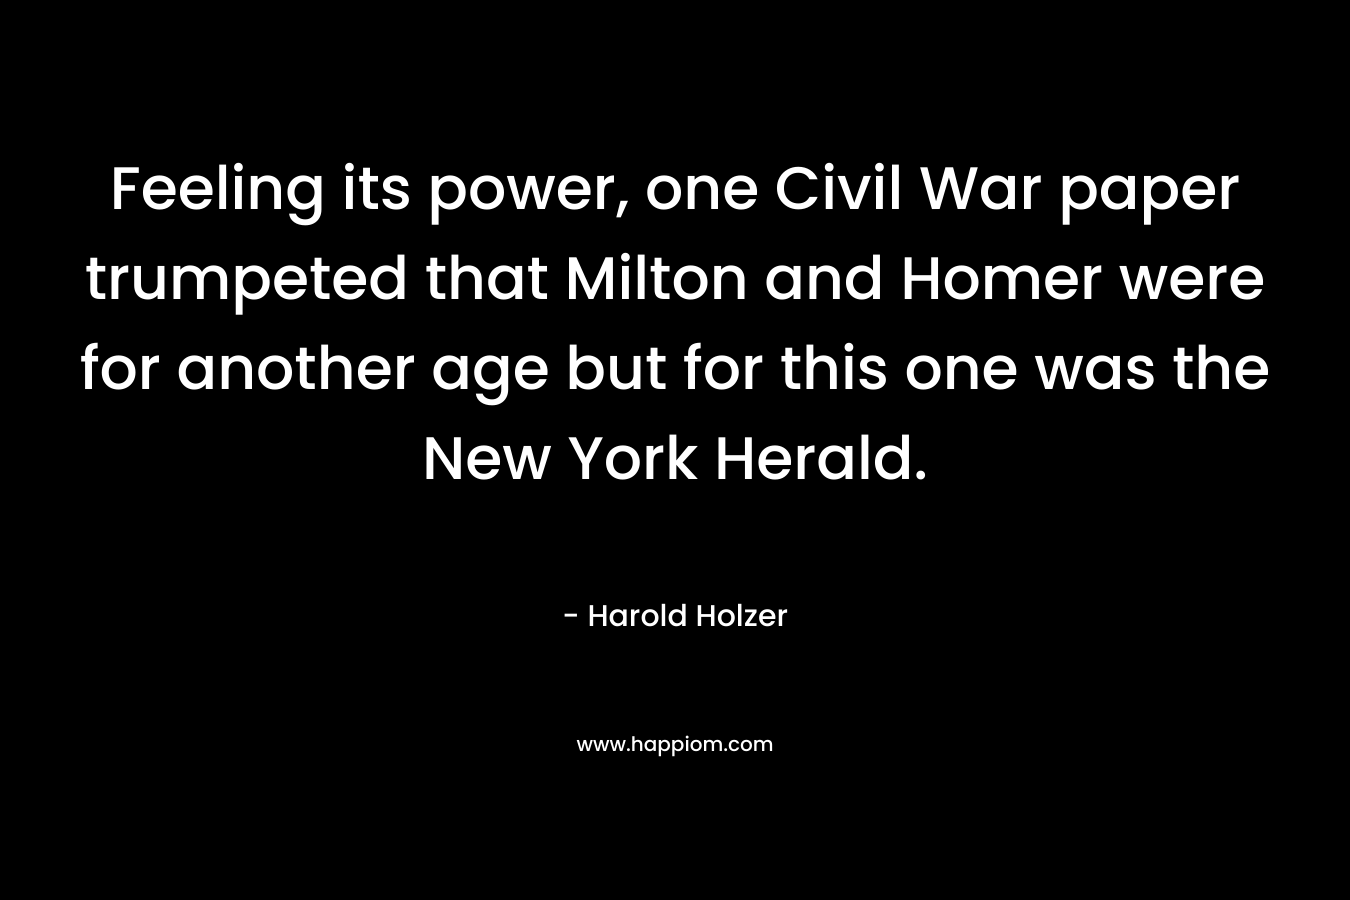 Feeling its power, one Civil War paper trumpeted that Milton and Homer were for another age but for this one was the New York Herald.